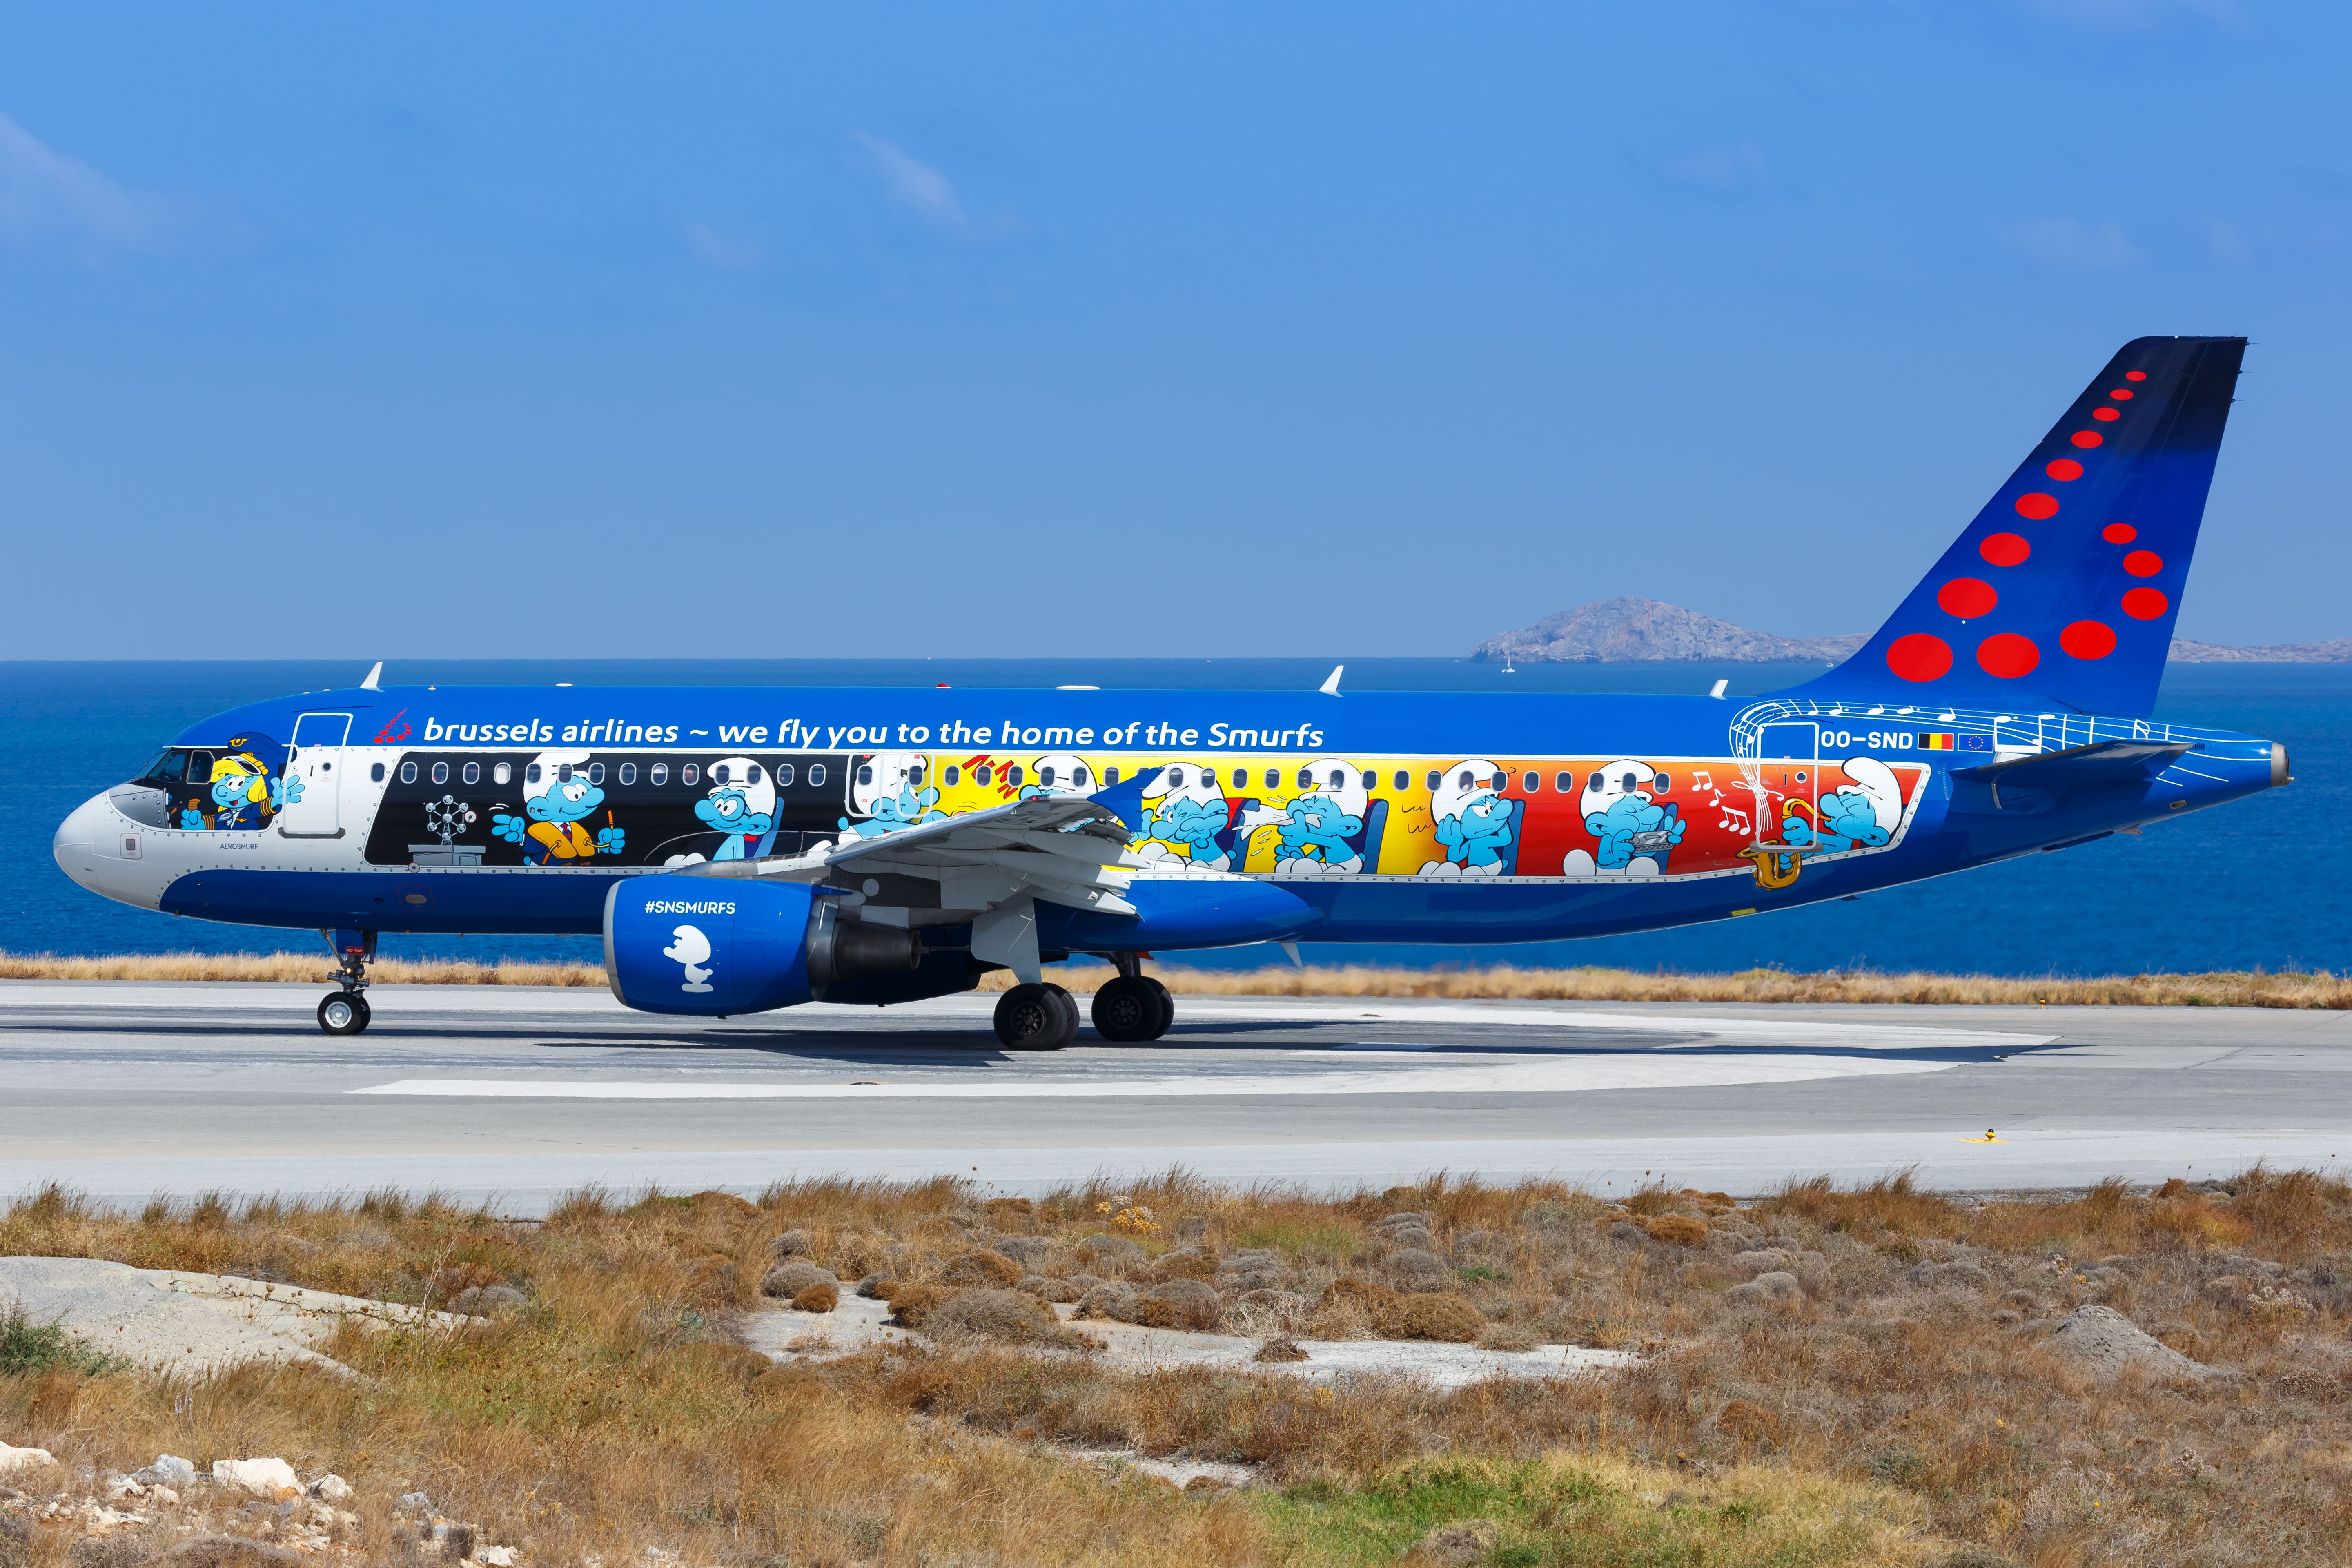 Brussels Airlines A320 featuring the Smurfs livery.